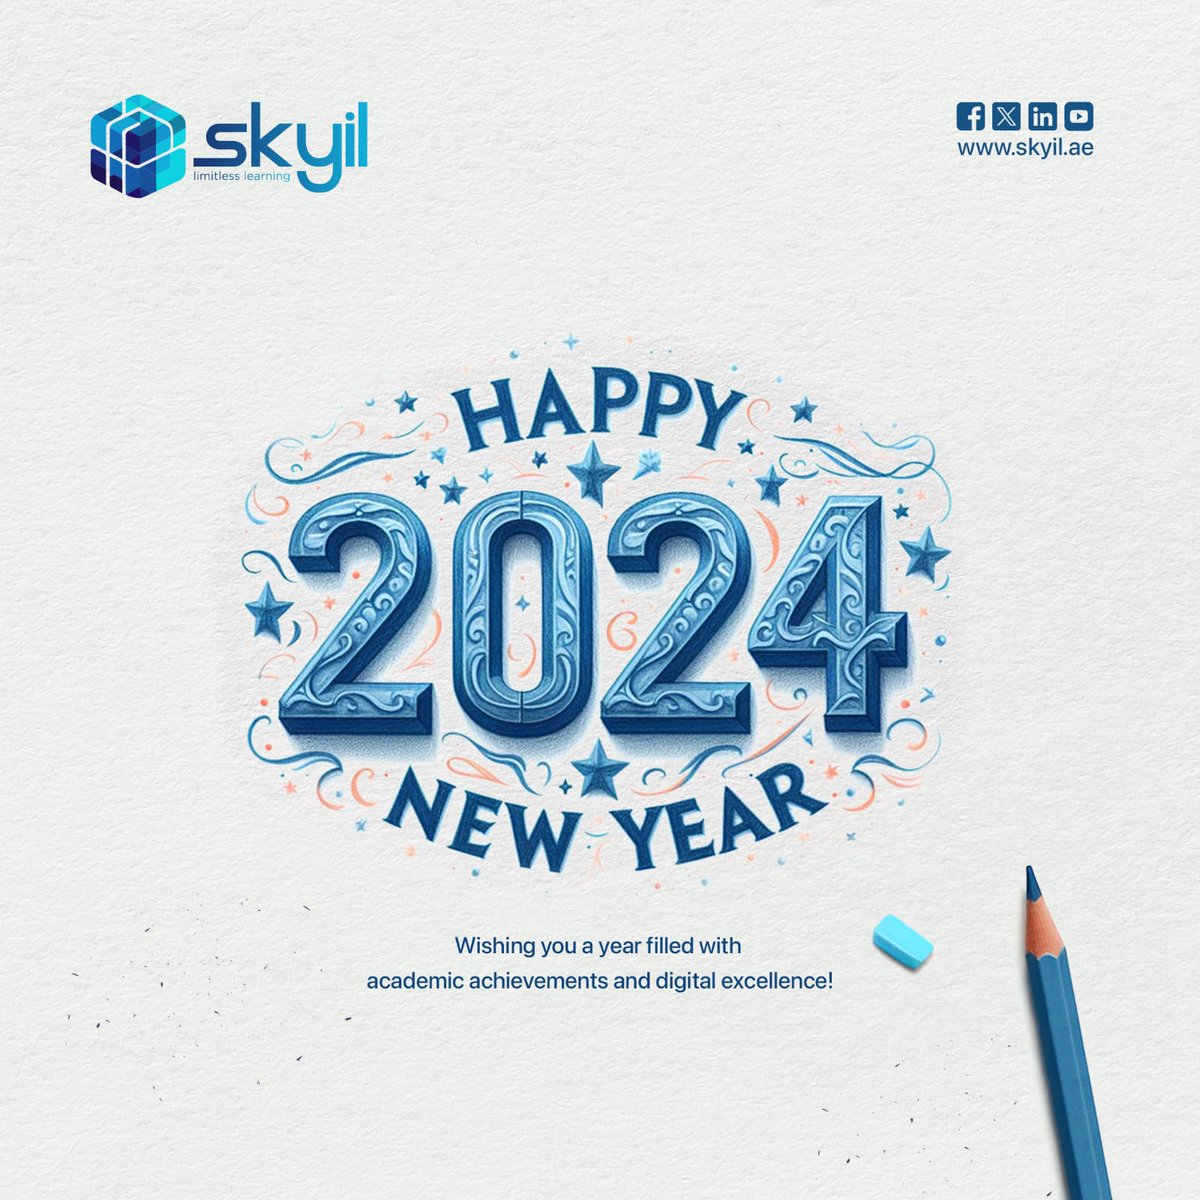 Level up your knowledge in 2024! Join us for Skill +1&+2 Commerce Tuition and make this year your most successful yet. 🌟📈
.
.
.
.
#NewYearGoals #Skyilofficial #Skyil #onlinetution #commercetuition #newyear2024